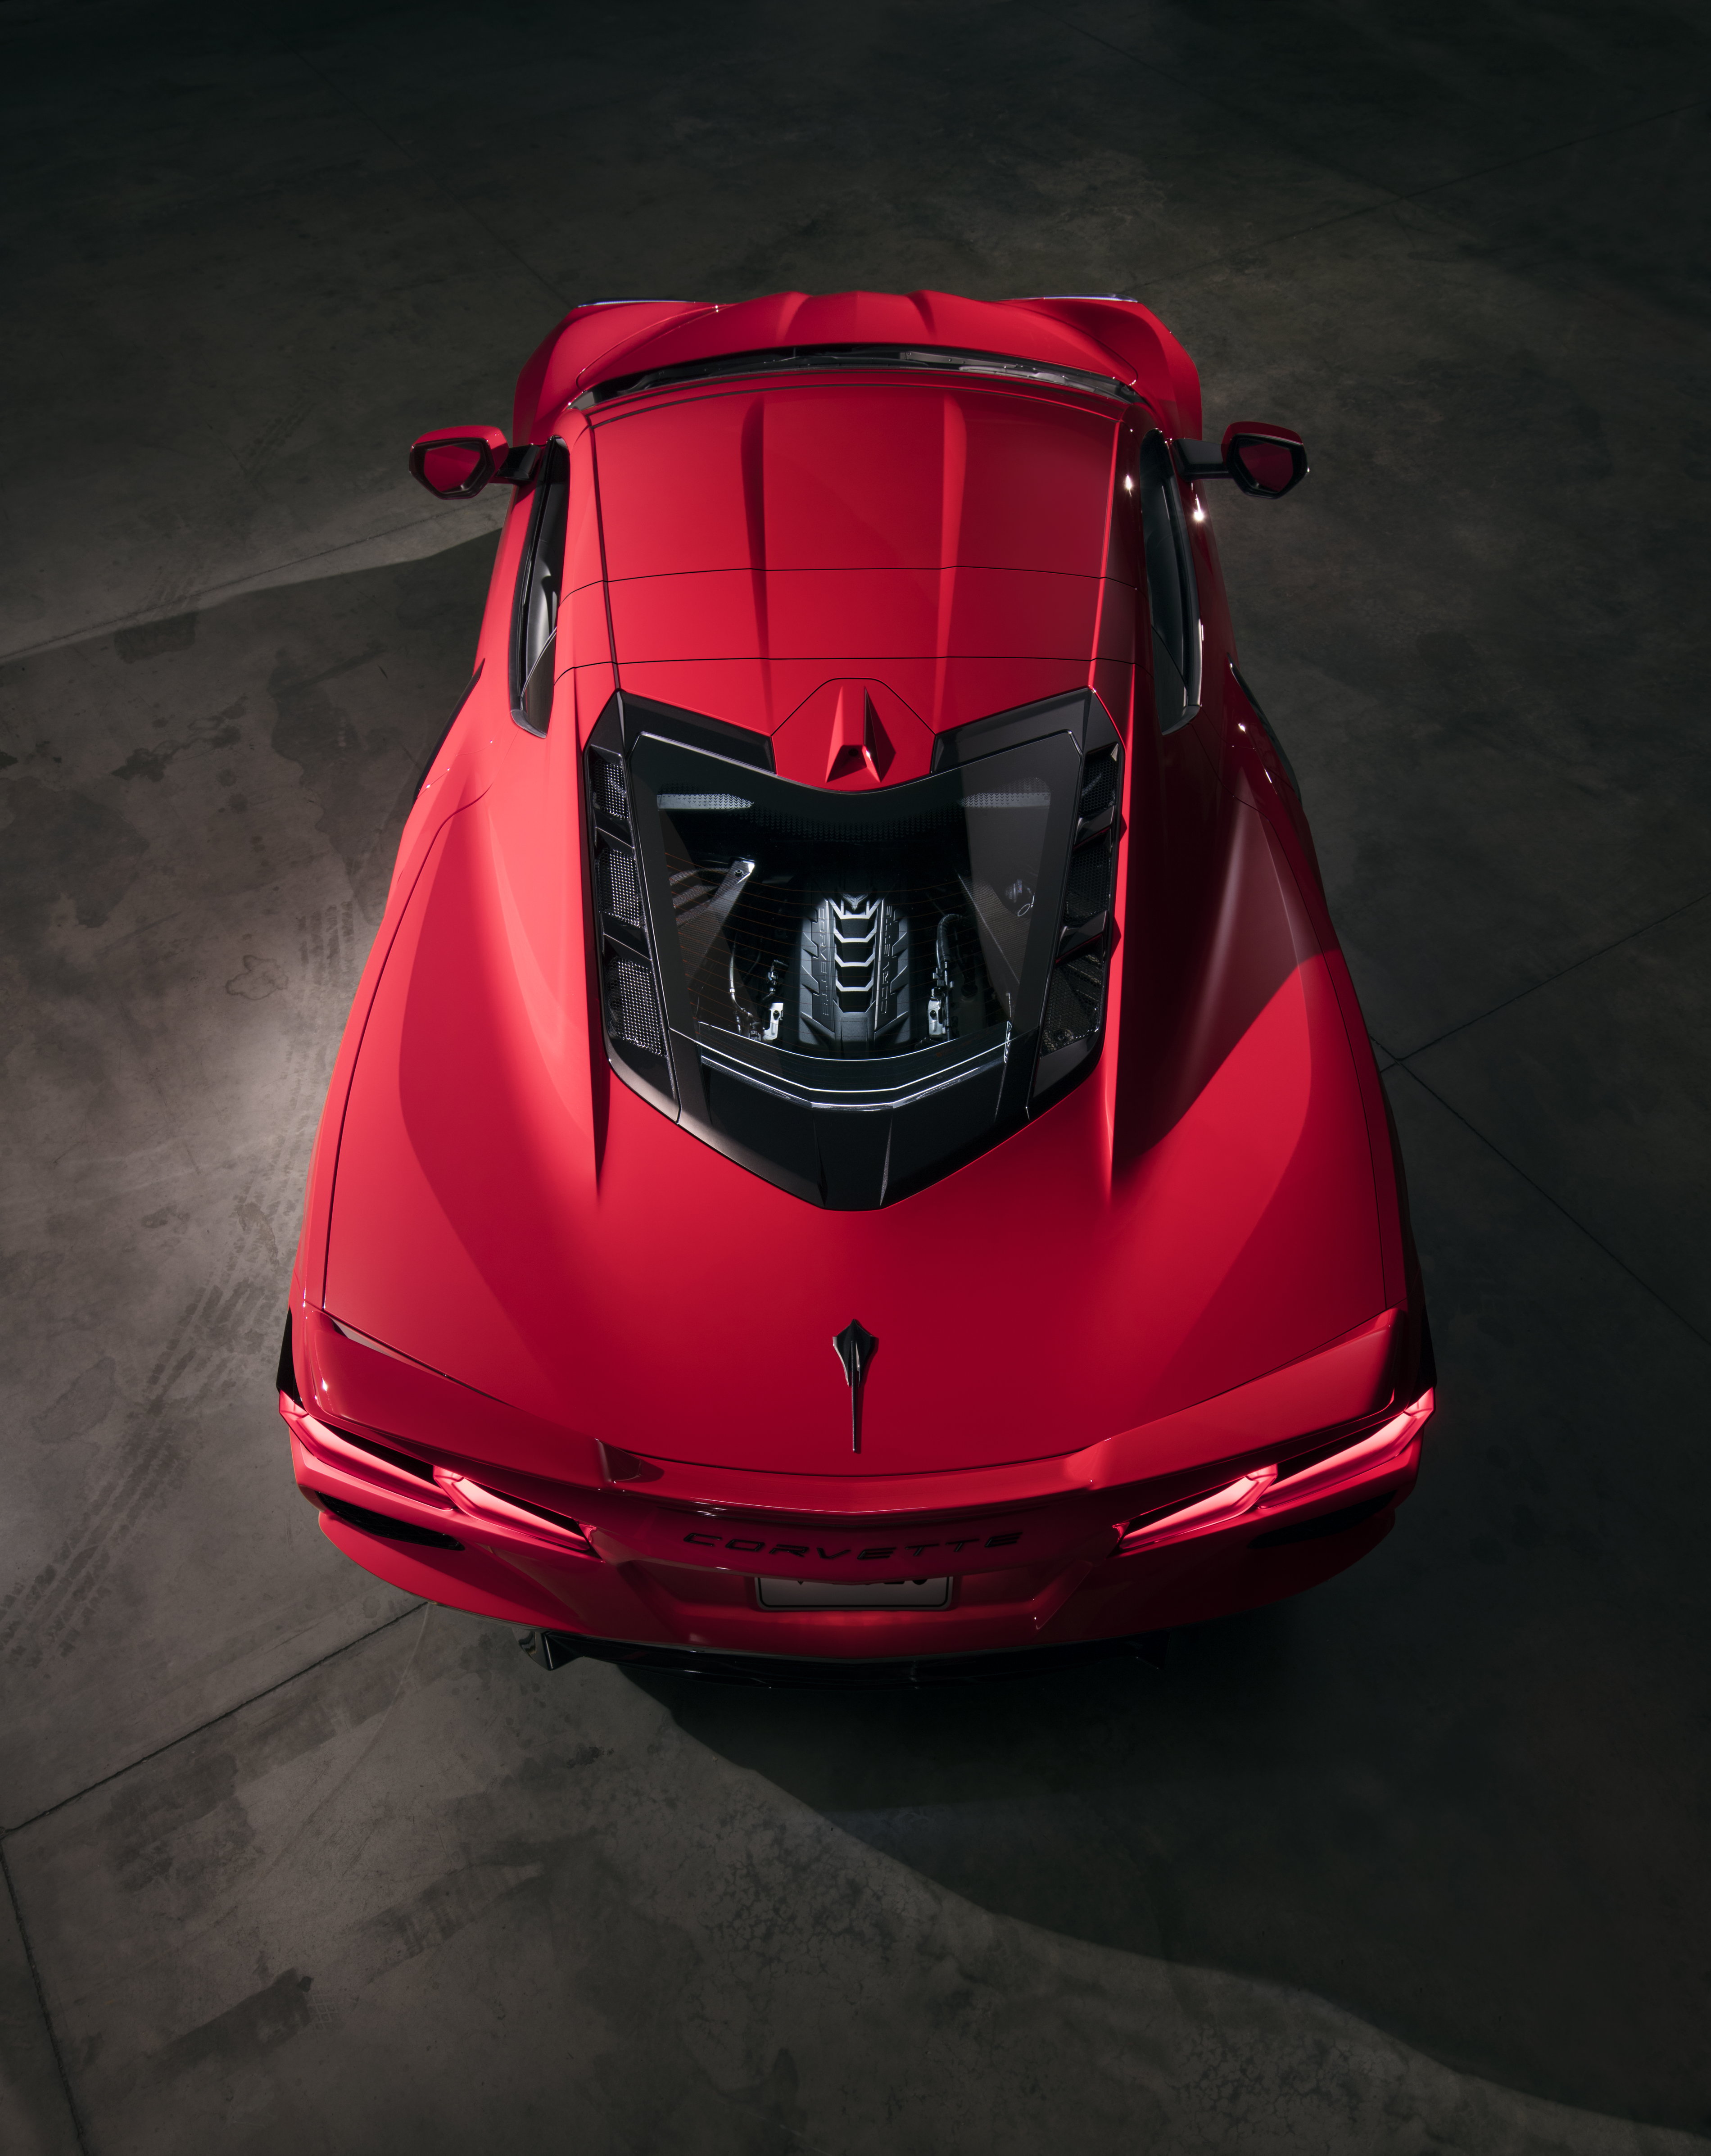 Free Download Chevrolet Introduces First Ever Mid Engine Corvette Images, Photos, Reviews